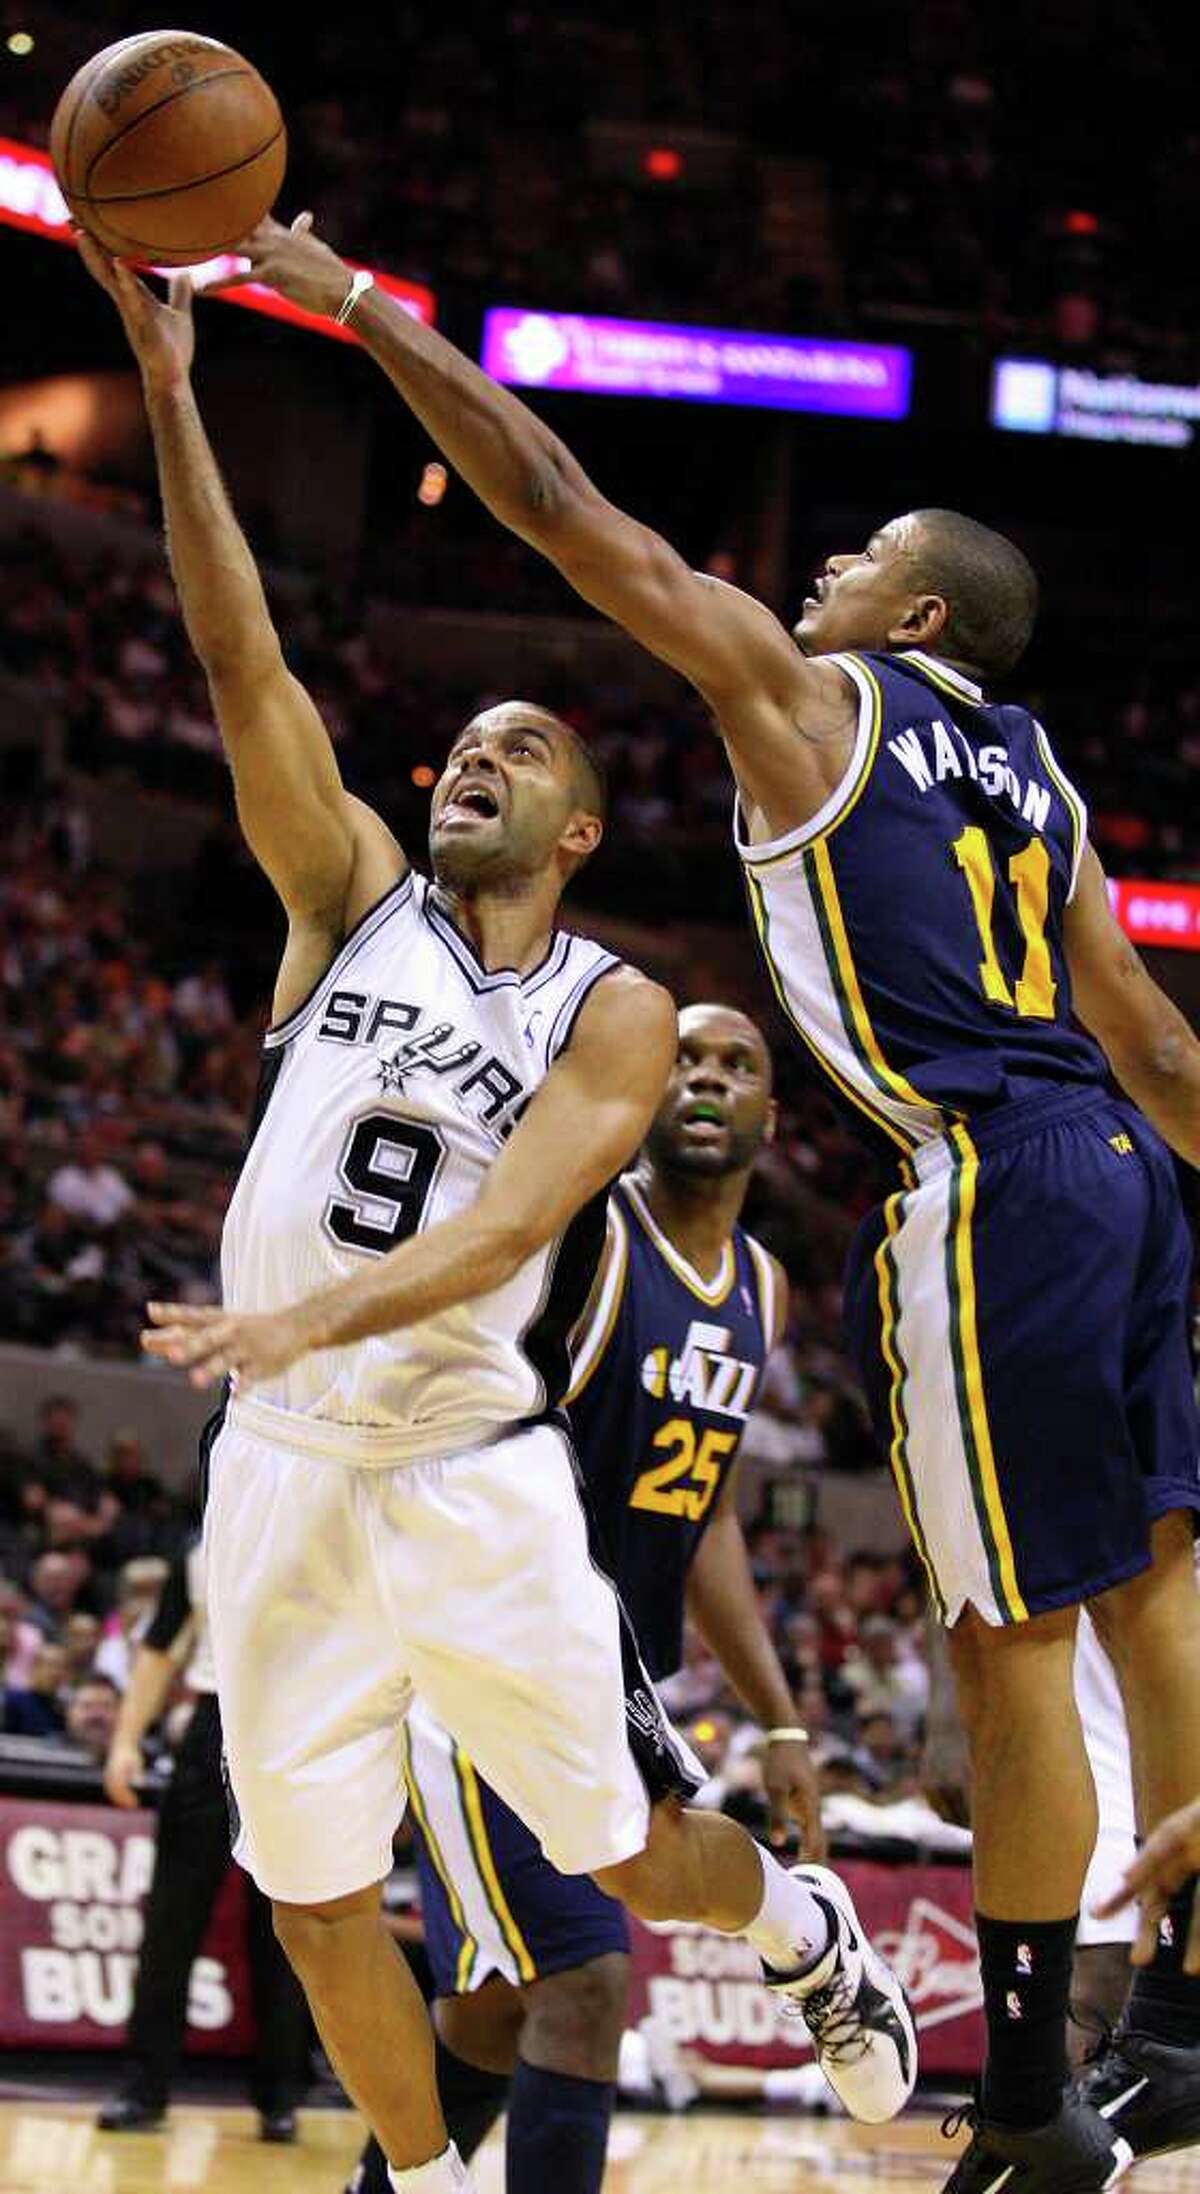 Spurs' Tony Parker shoots around Jazz's Earl Watson during second half action Saturday April 9, 2011 at the AT&T Center. The Spurs won 111-102. (PHOTO BY EDWARD A. ORNELAS/eaornelas@express-news.net)